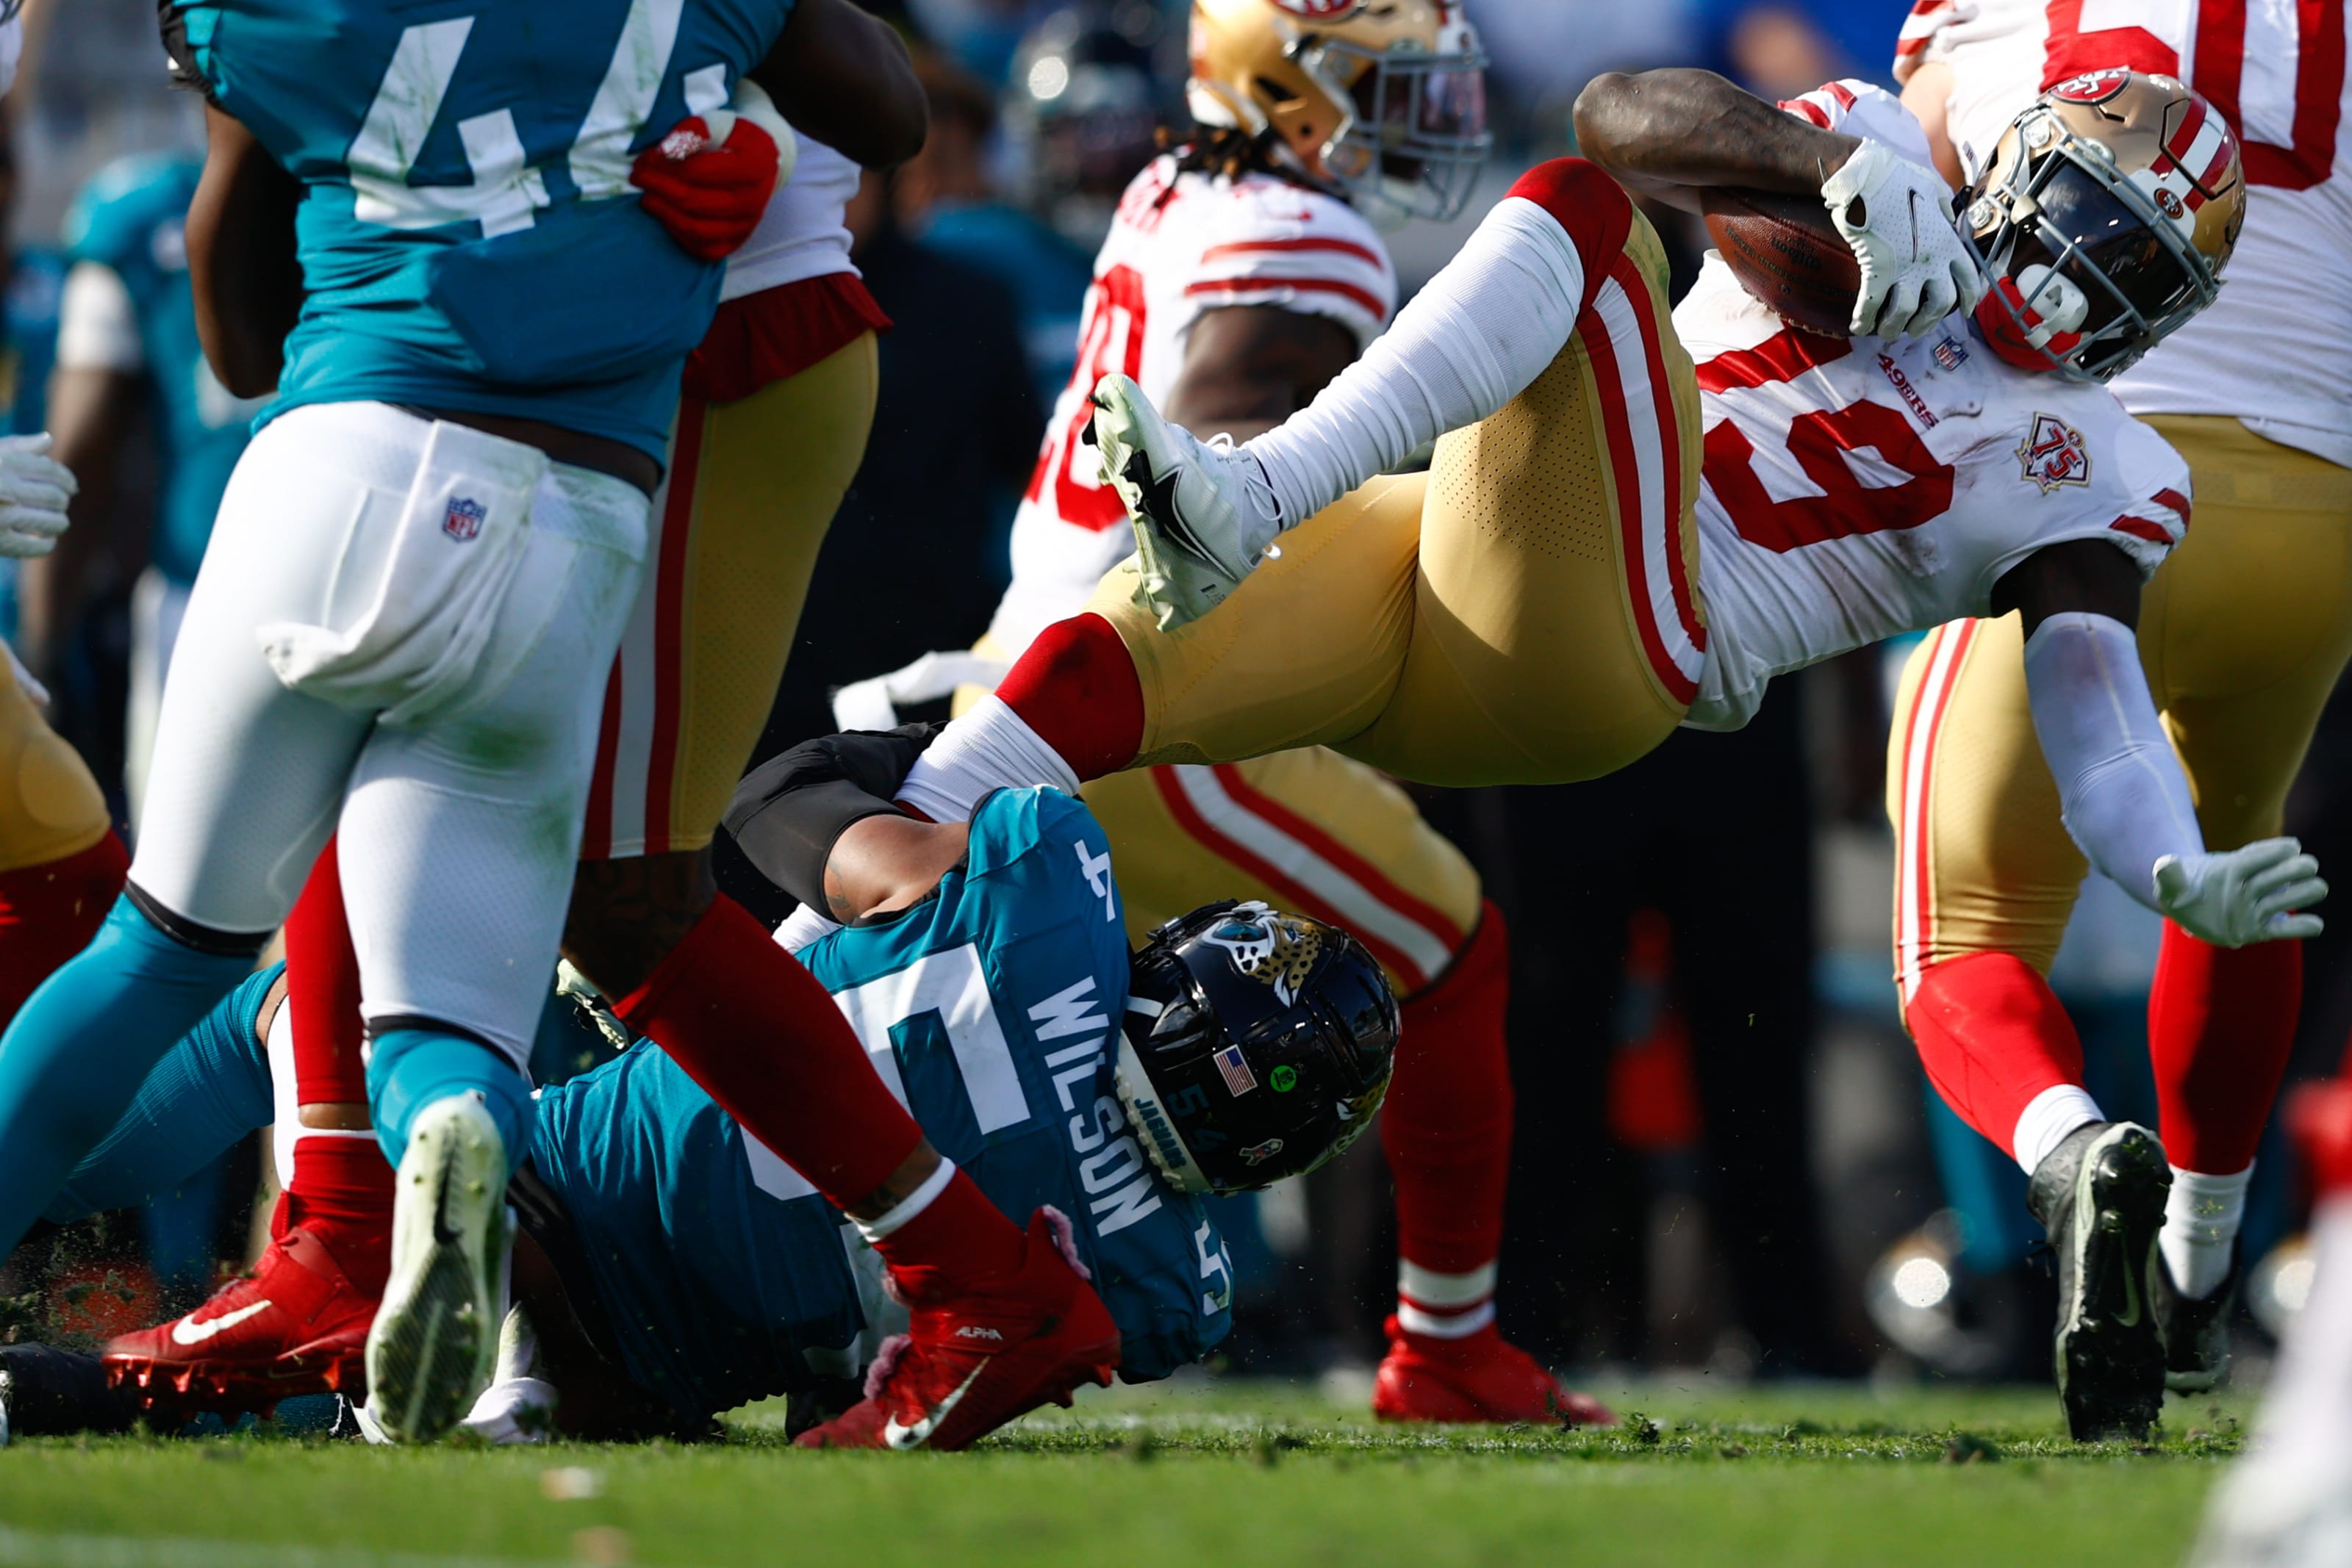 4 biggest jawdropping plays from 49ers win vs. Jaguars